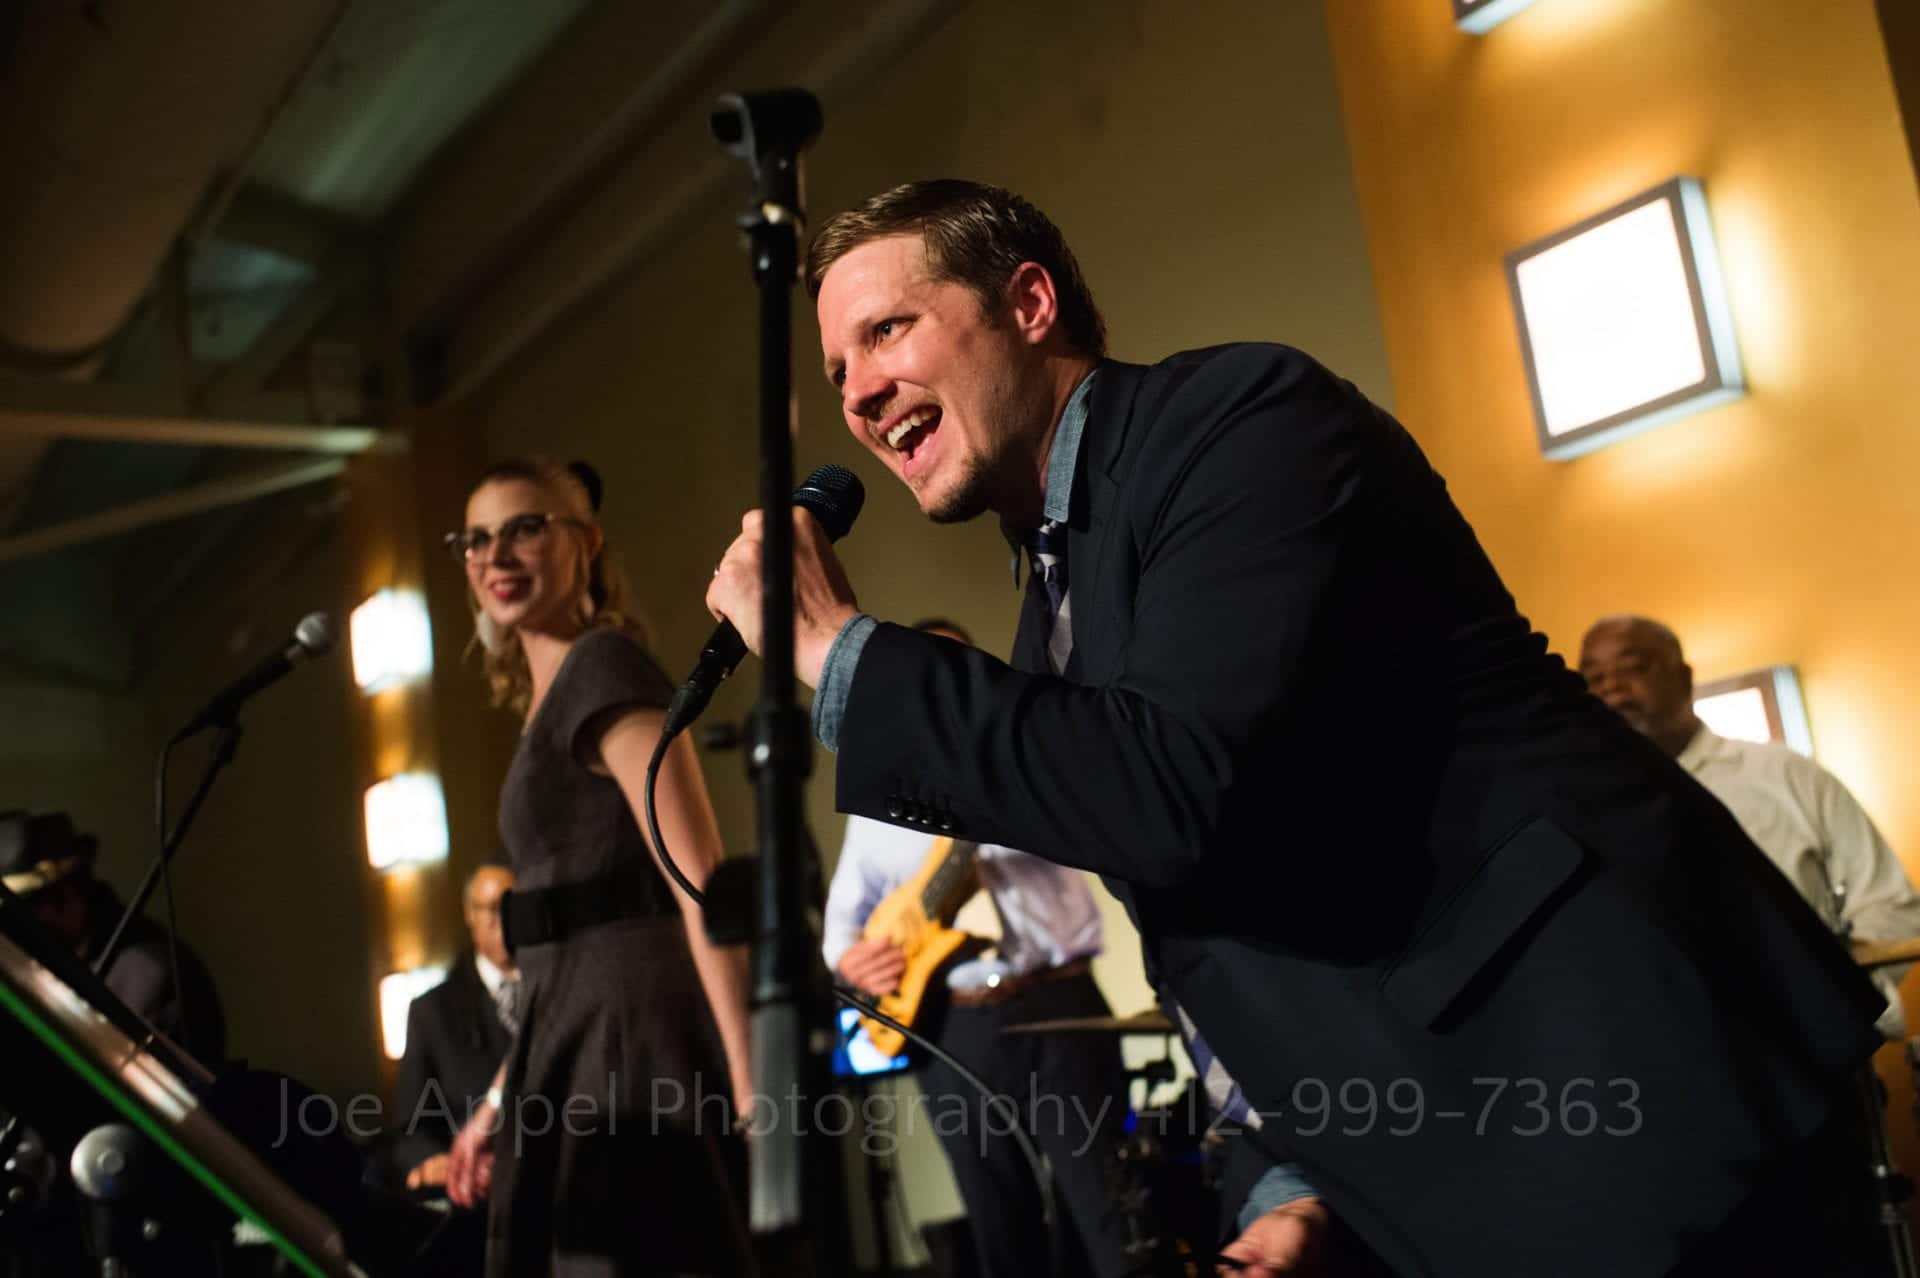 Singer in a band leans forward as he hits a note while a female singer dances behind him.